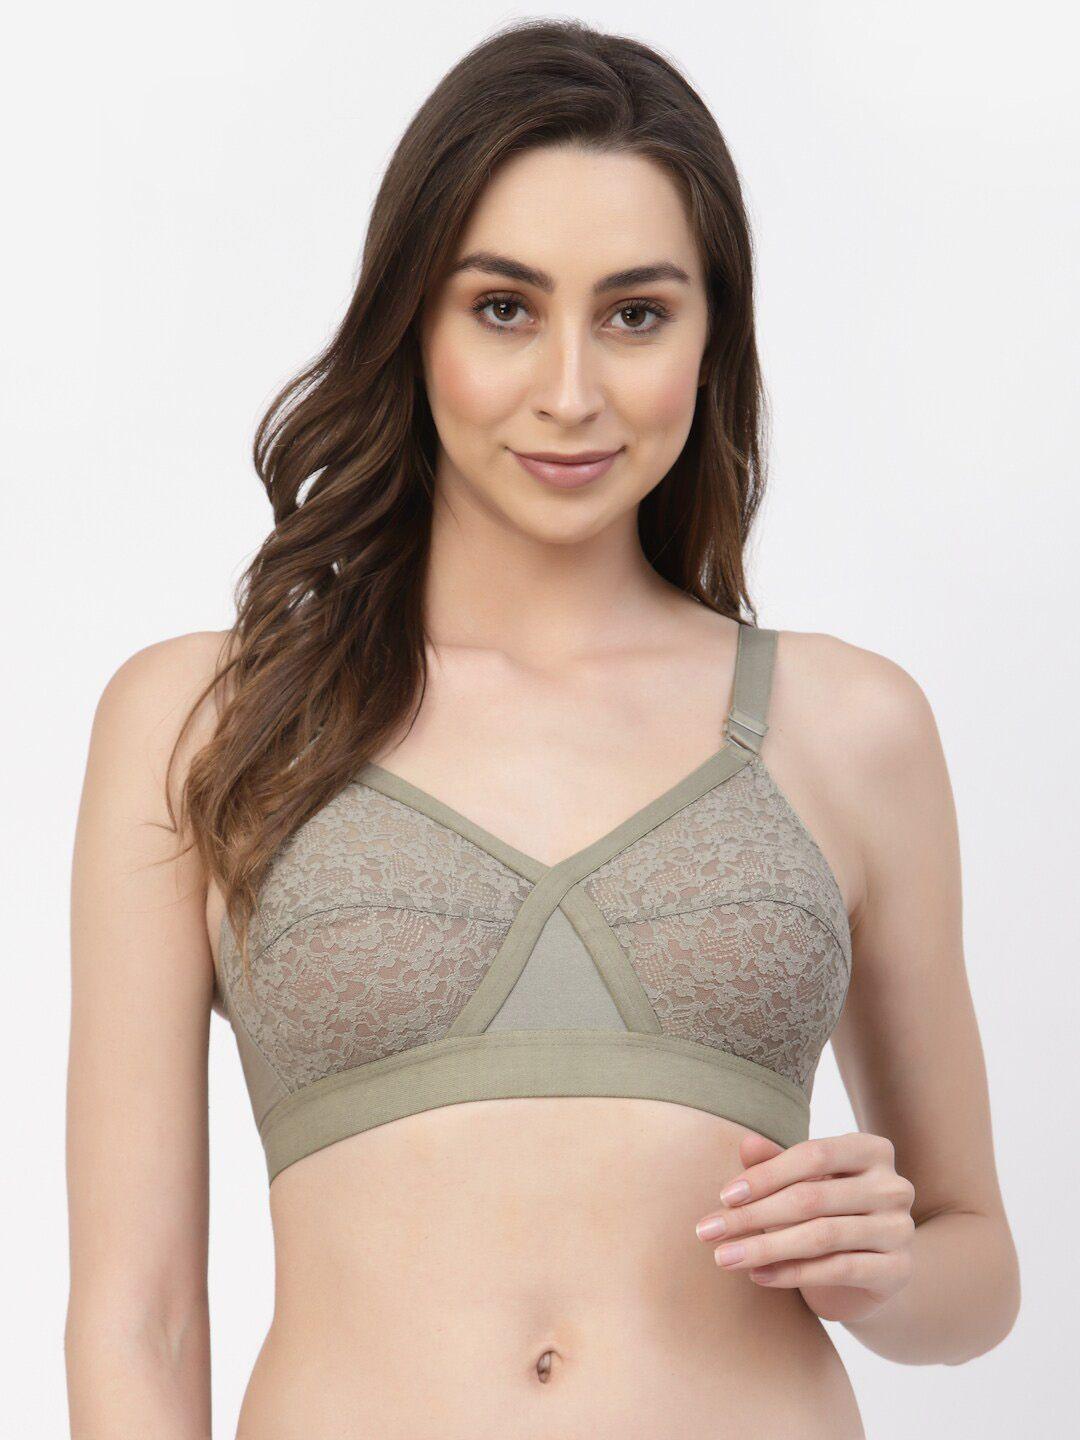 floret floral lace full coverage non-wired non-padded super supportive bra